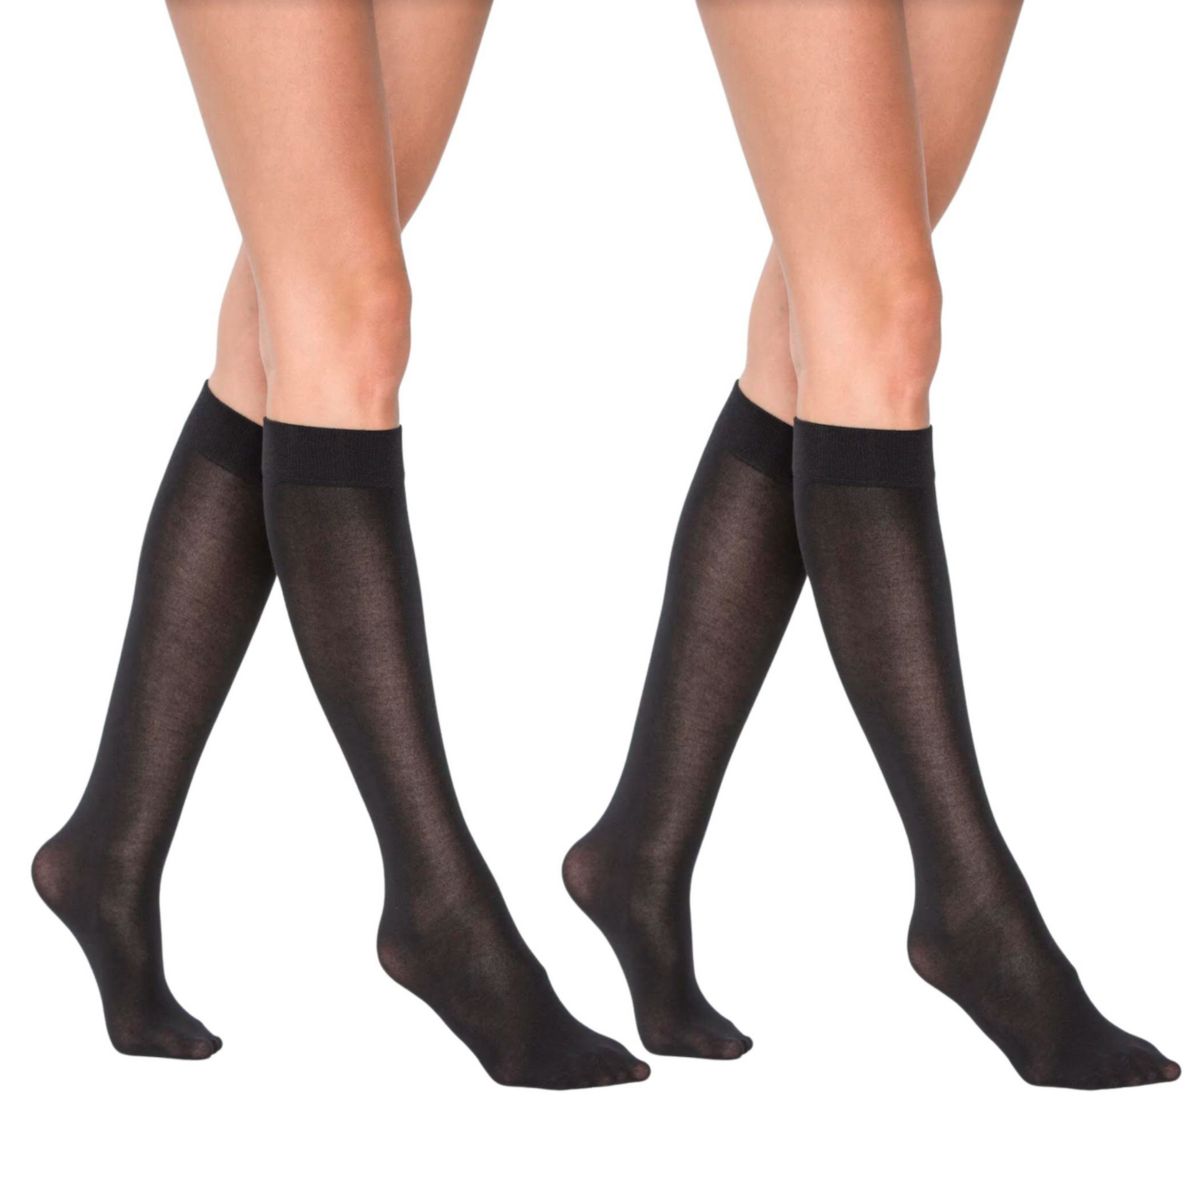 LECHERY® Velvety Silky Opaque 2 Pairs of Knee-highs Lechery